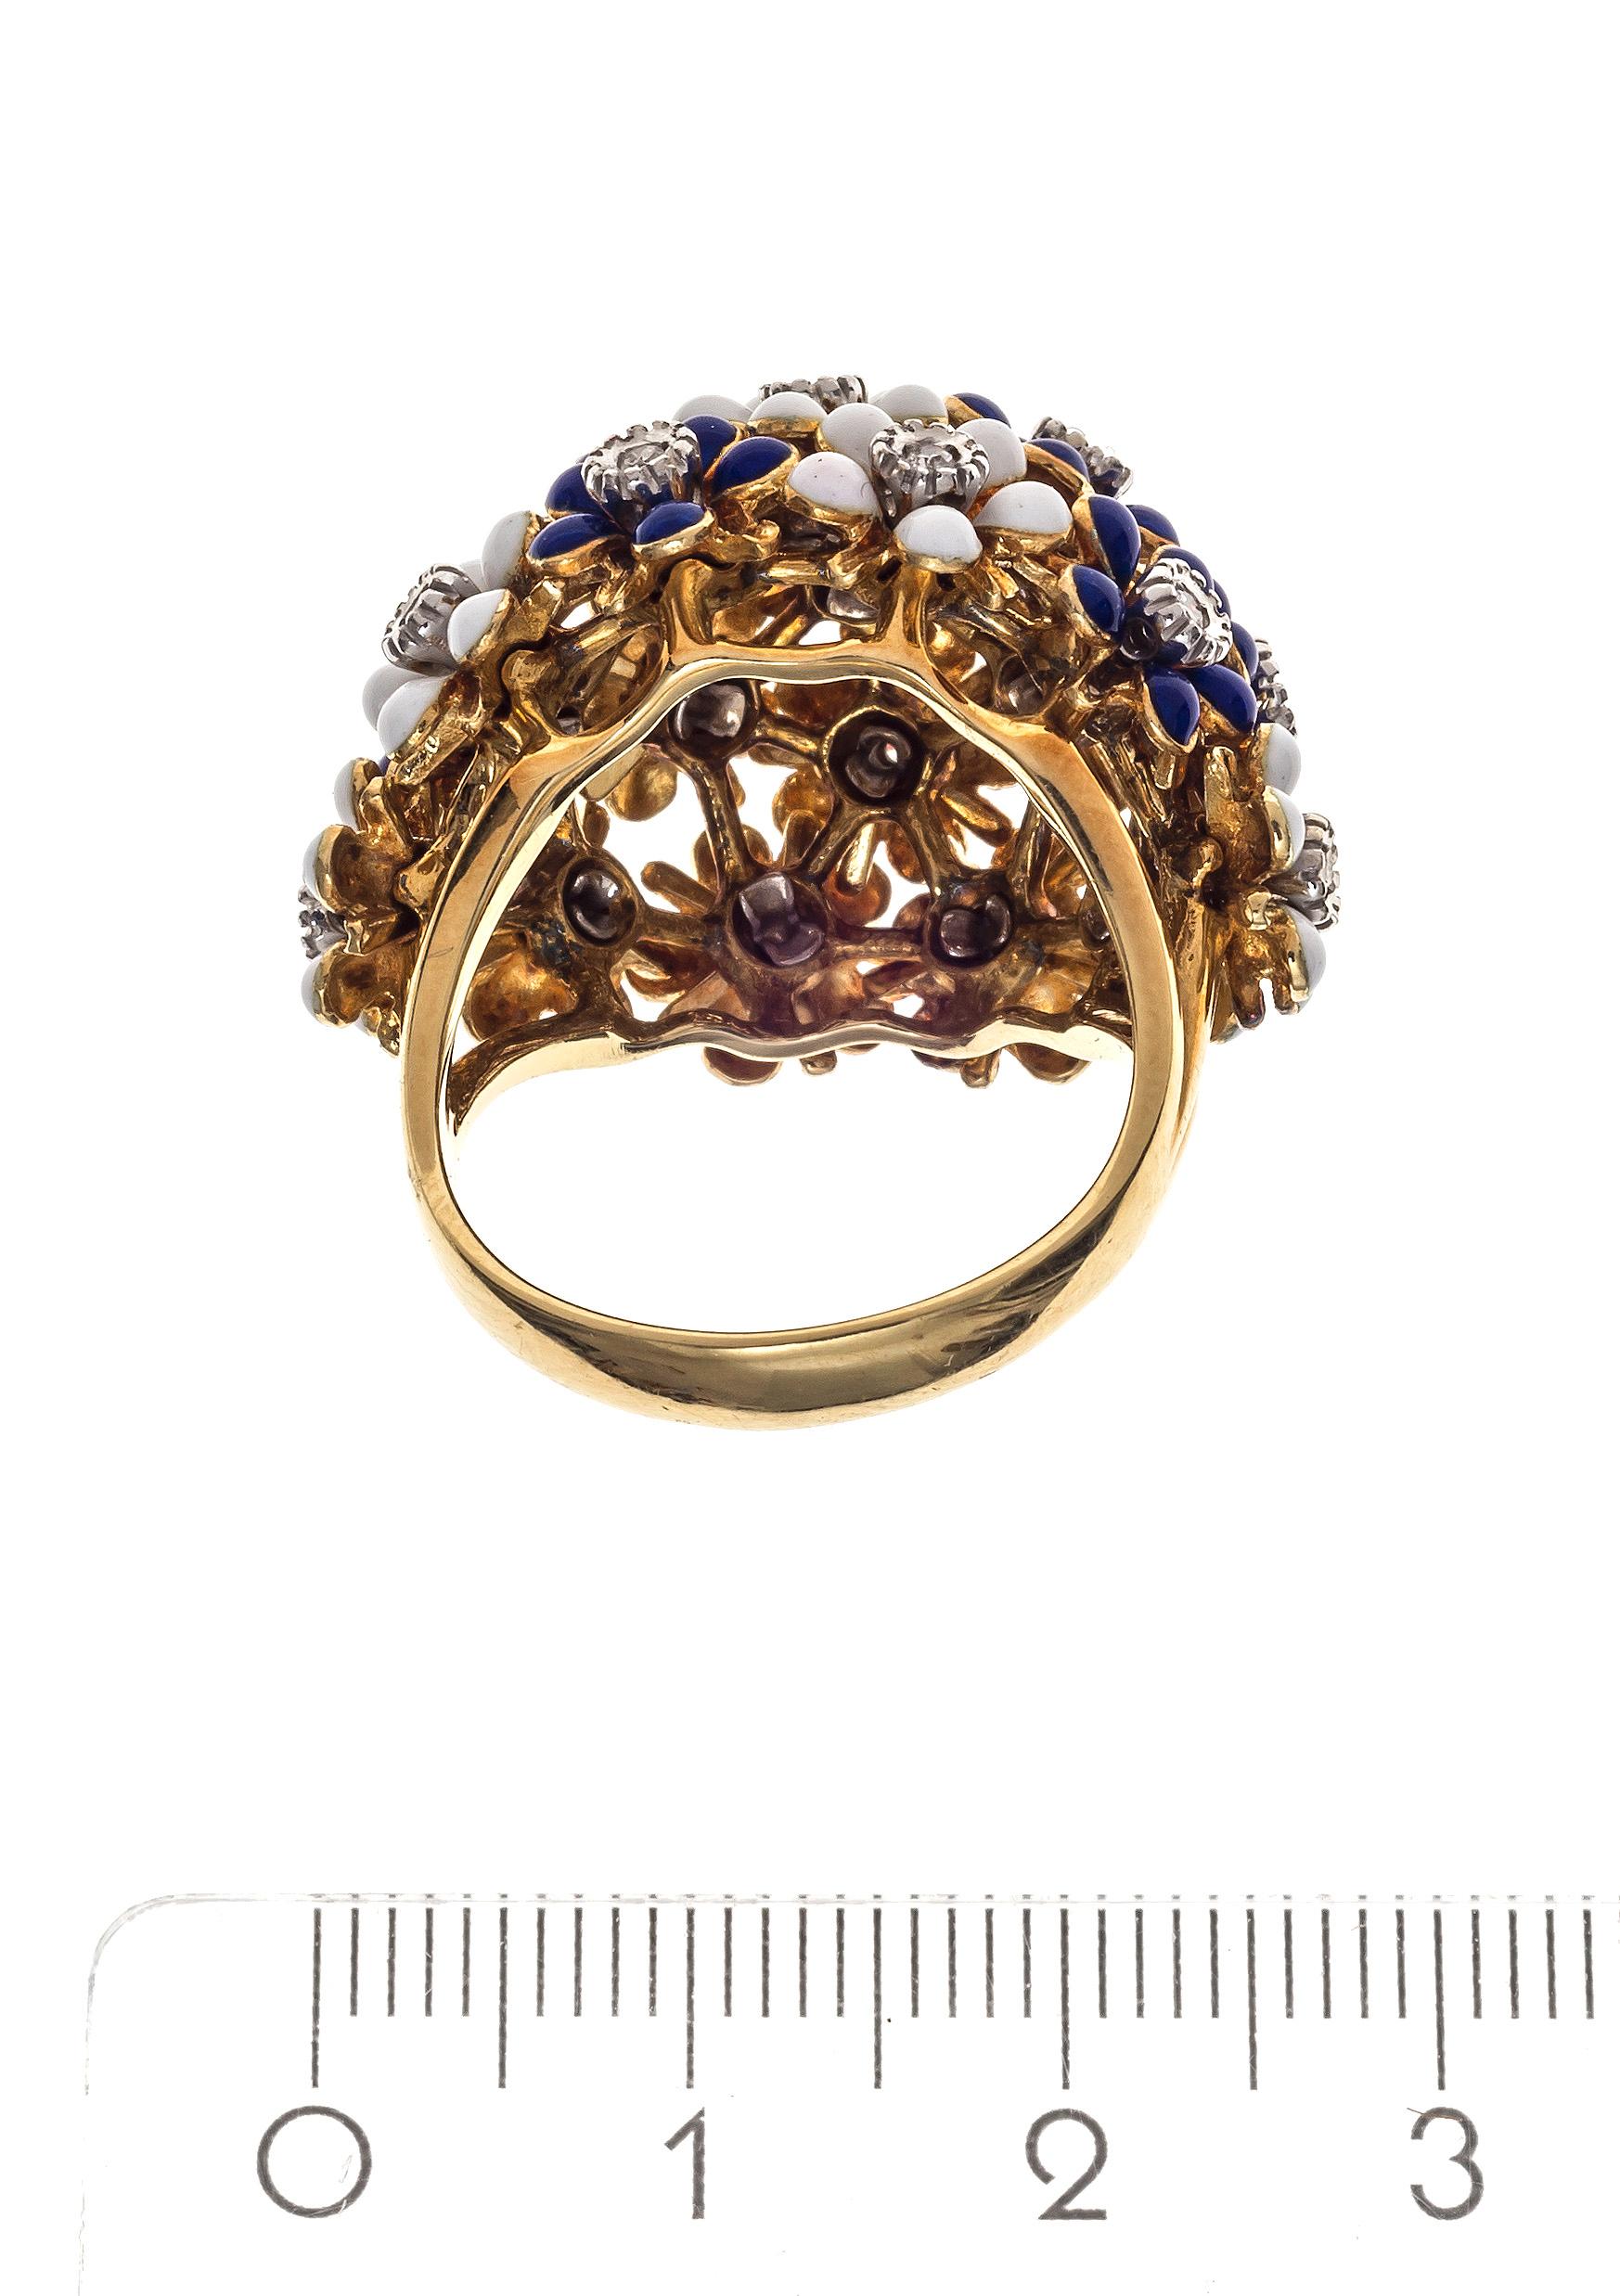 vintage gold dome ring